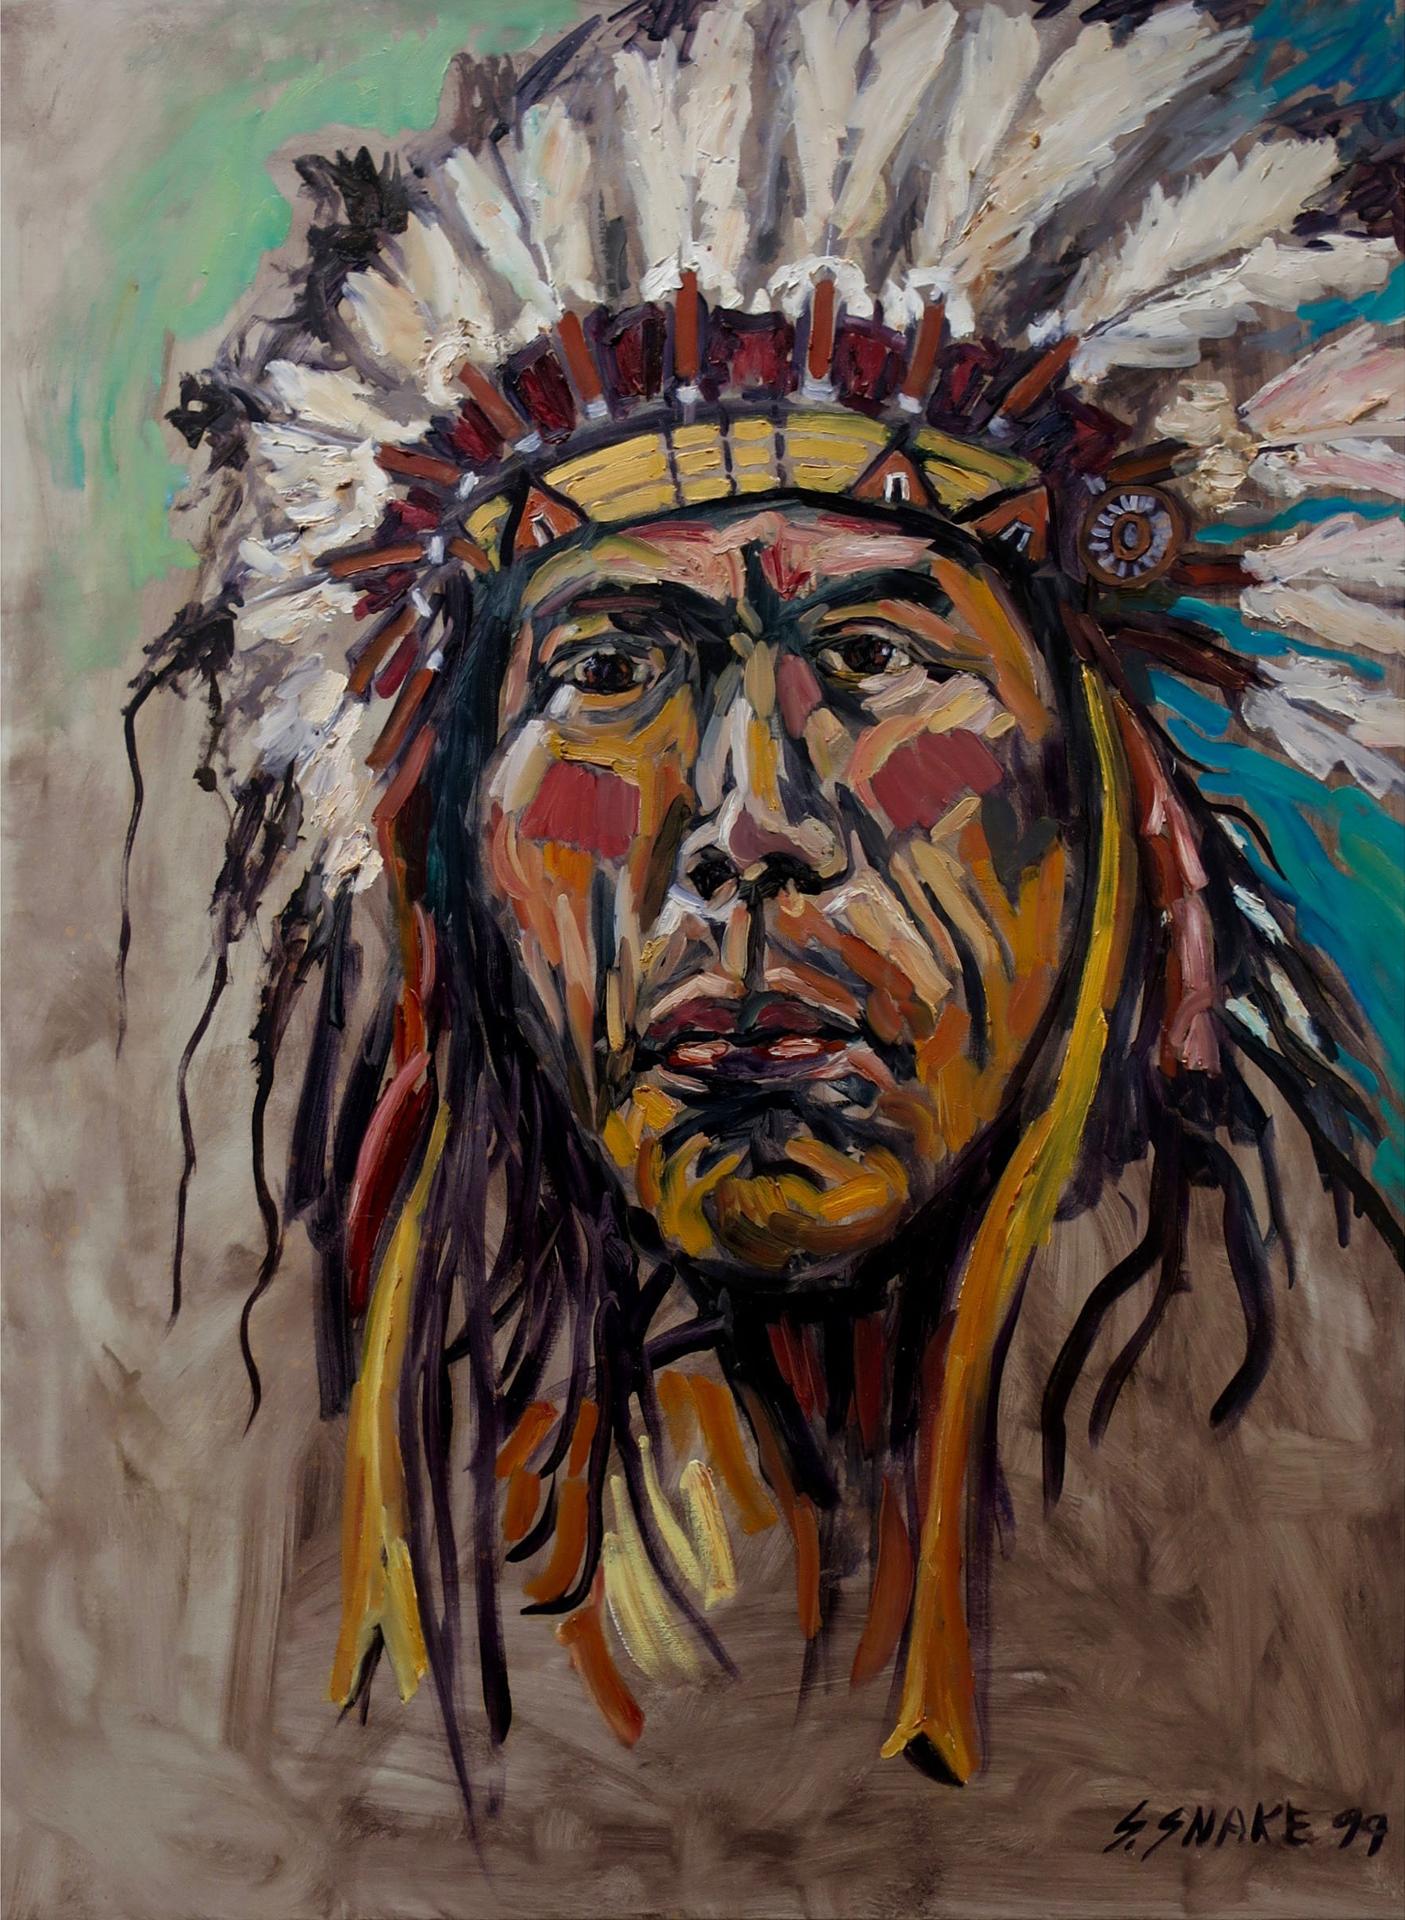 Stephen Snake (1967) - Untitled (Portrait Of A Chief)